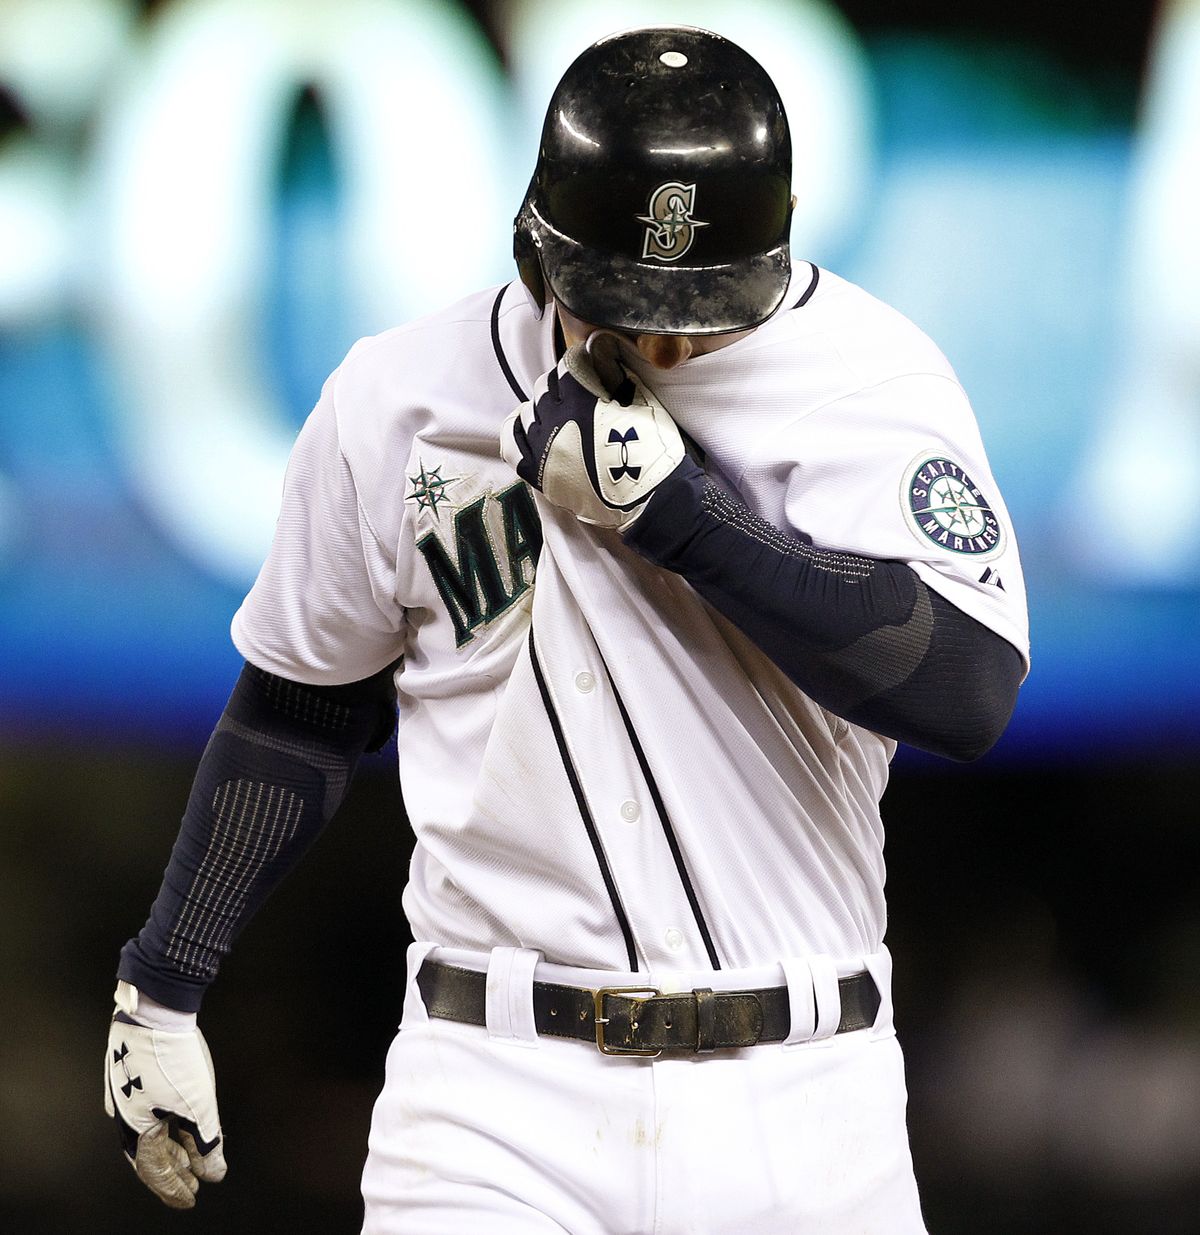 Mariners’ Kyle Seager hides his face as he walks off the field after flying out to end the game, a 2-1 come-from-behind win for Cleveland. (Associated Press)